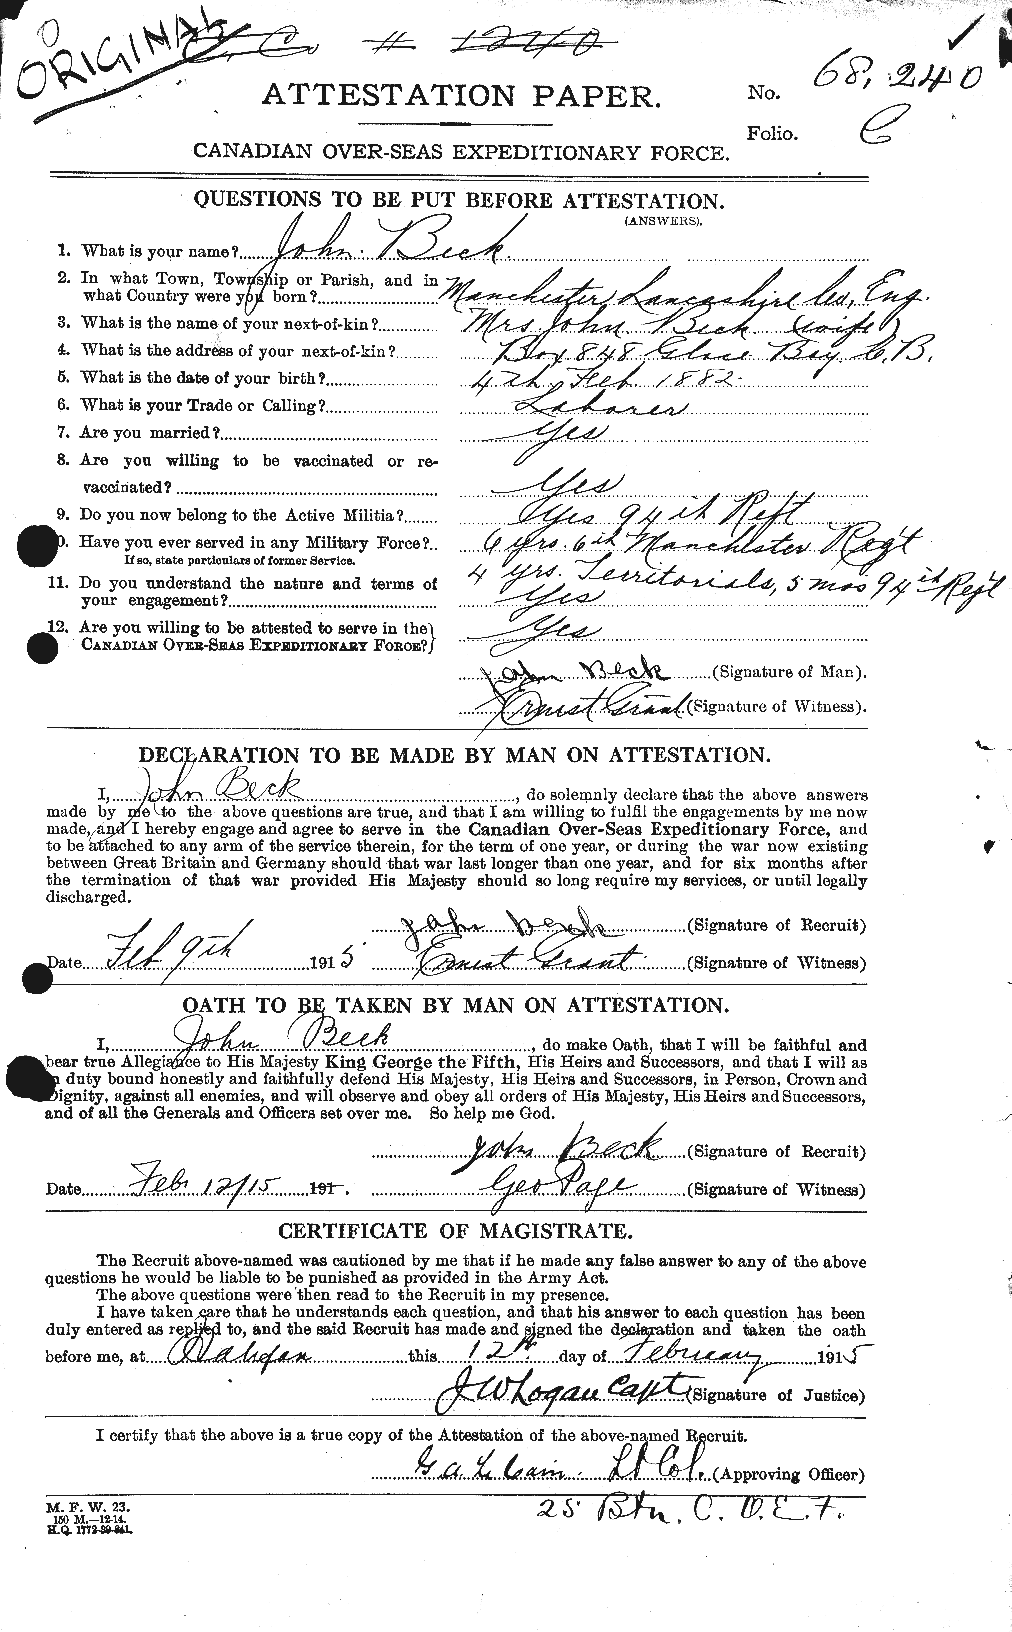 Personnel Records of the First World War - CEF 232164a